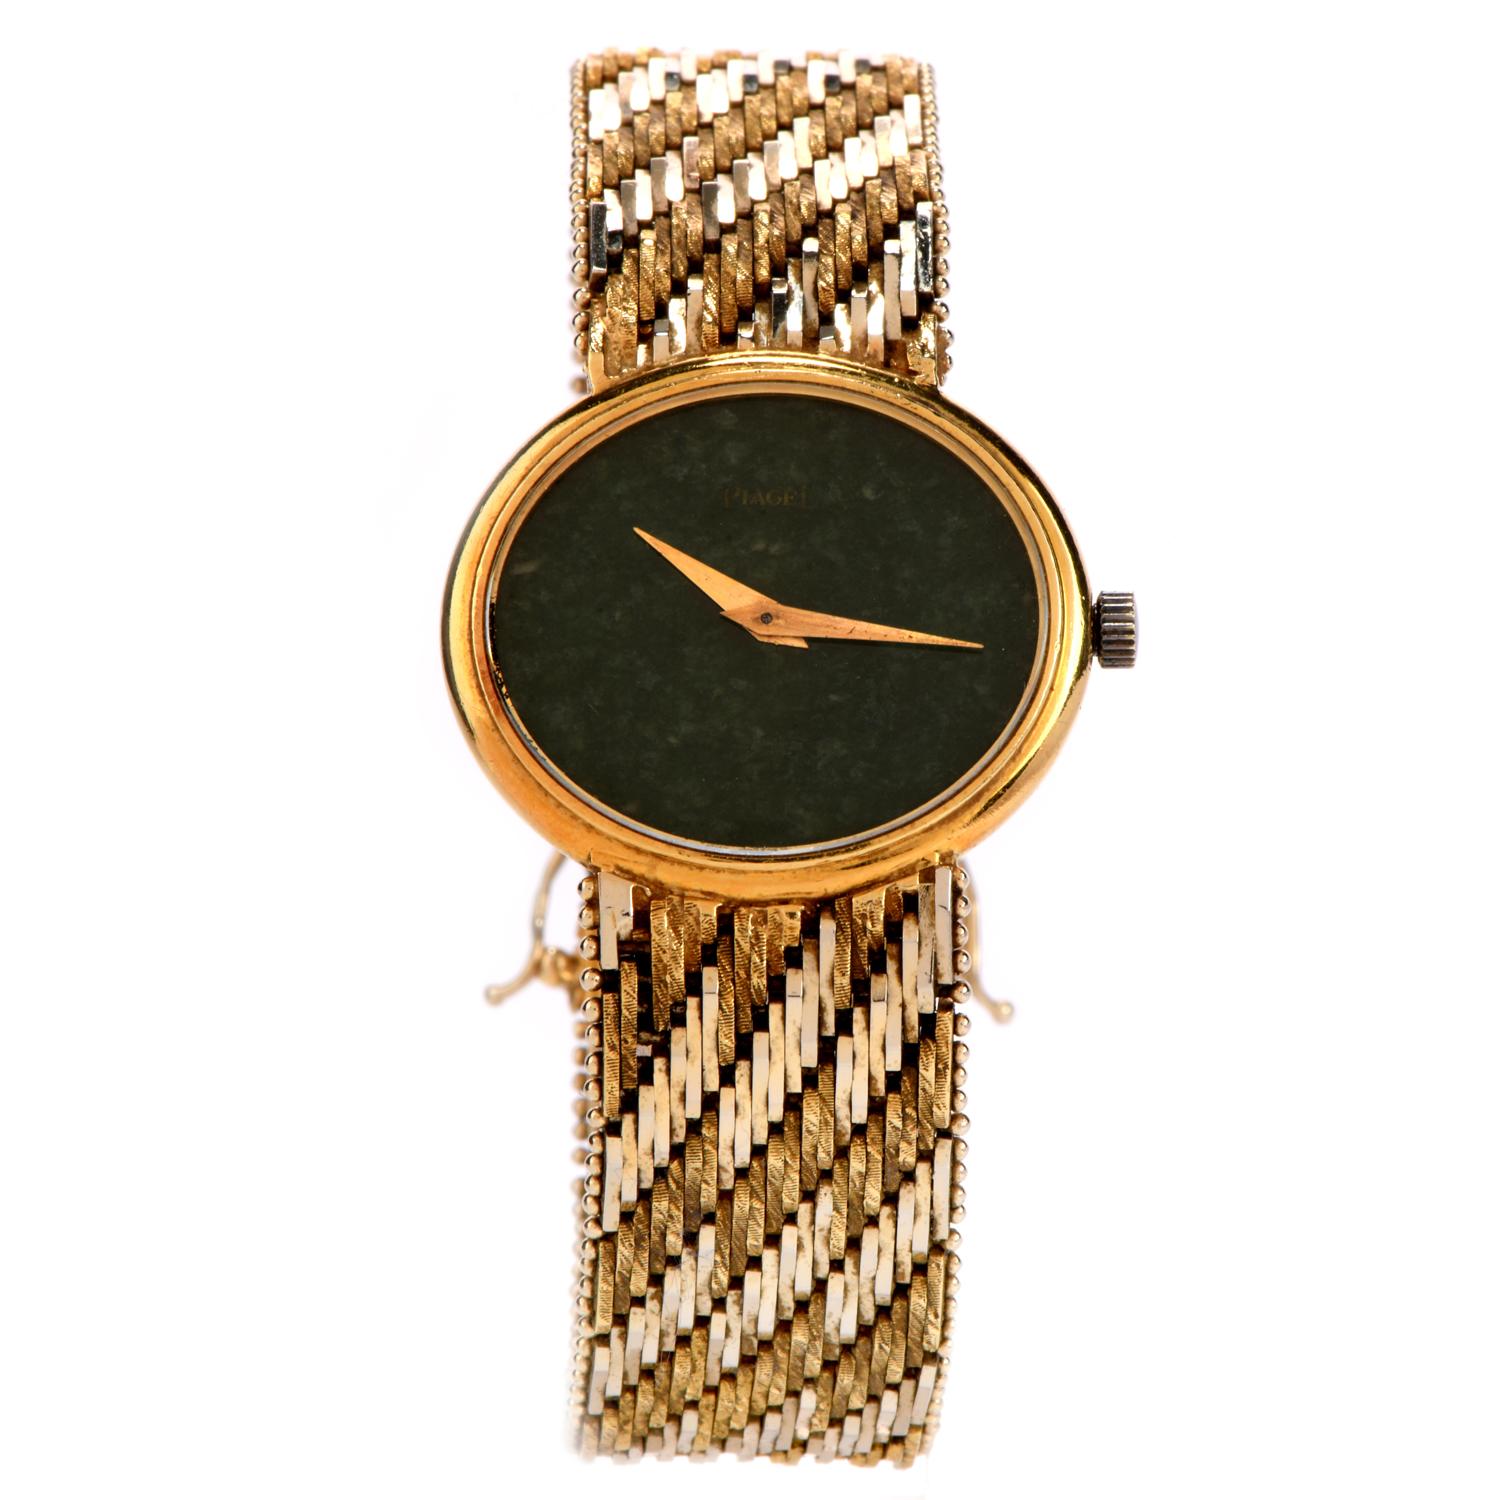 This Vintage Piaget 18K Gold Two Tone Woven Watch is perfect for someone who loves the Jade and the current trending retro fashions.  The watch band is 15 mm wide and is crafted in 18 karat yellow and white gold, displaying a

textured woven